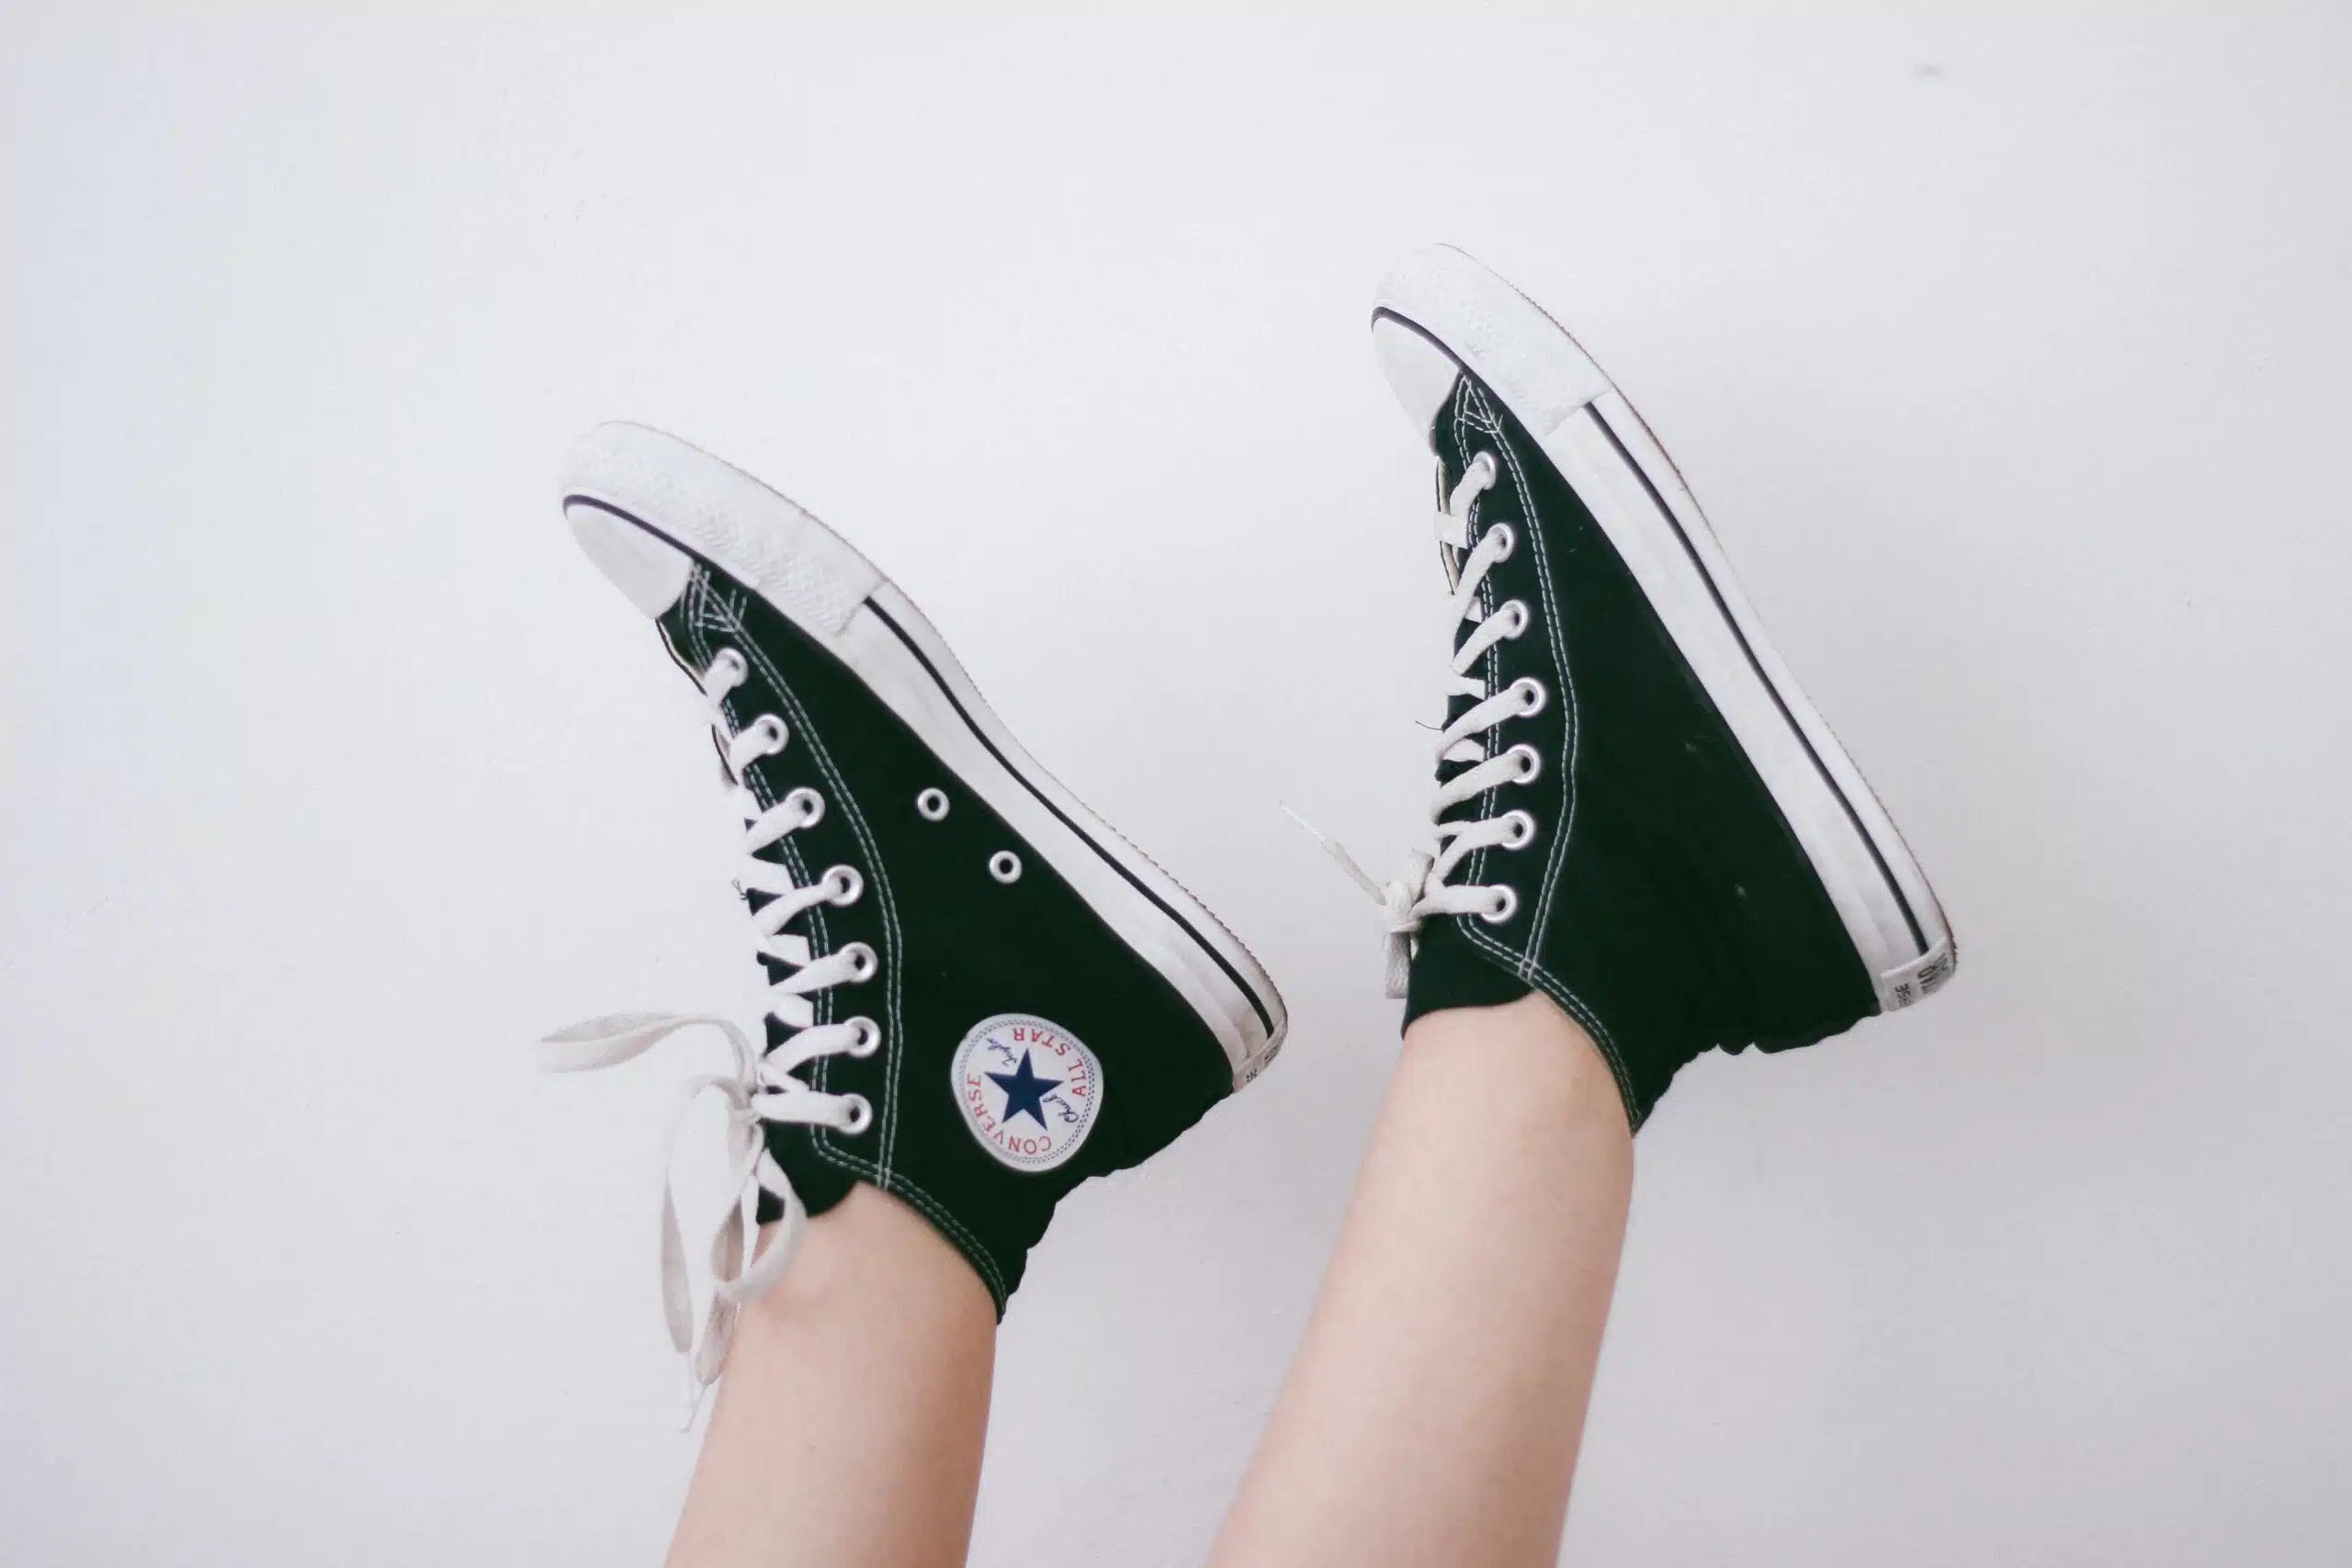 Sneakers. Photo by Camila Damásio on Unsplash.